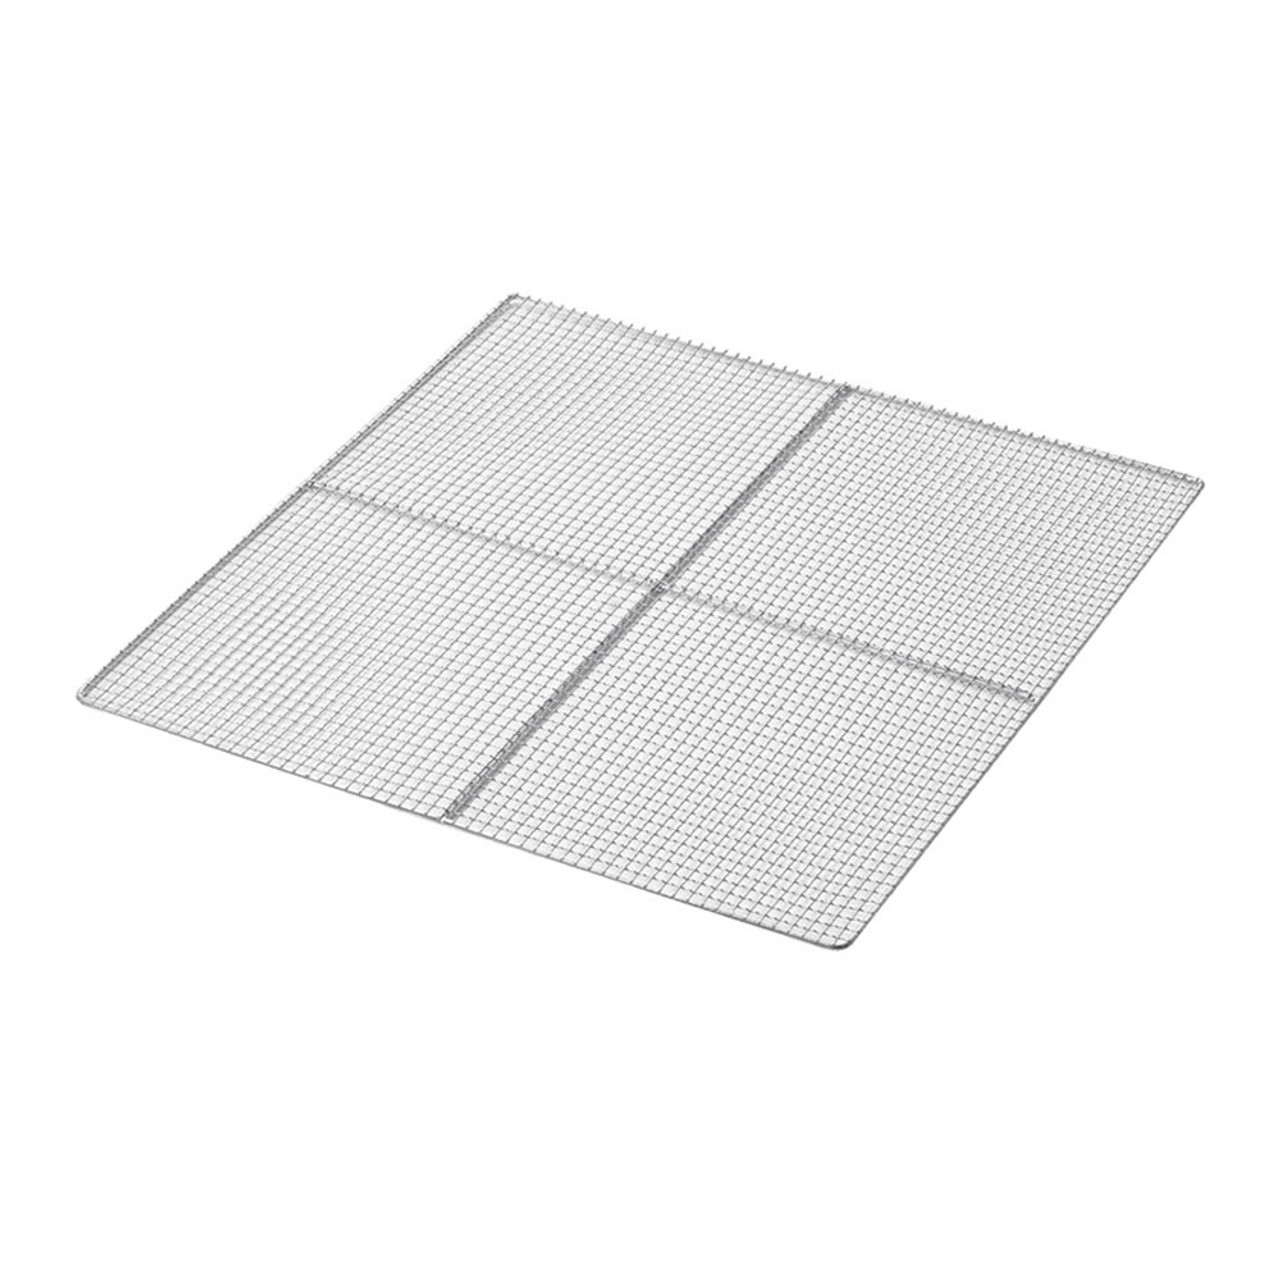 16 x 16 Stainless Pan Dehydrator Trays 10-Pack 10-PT40